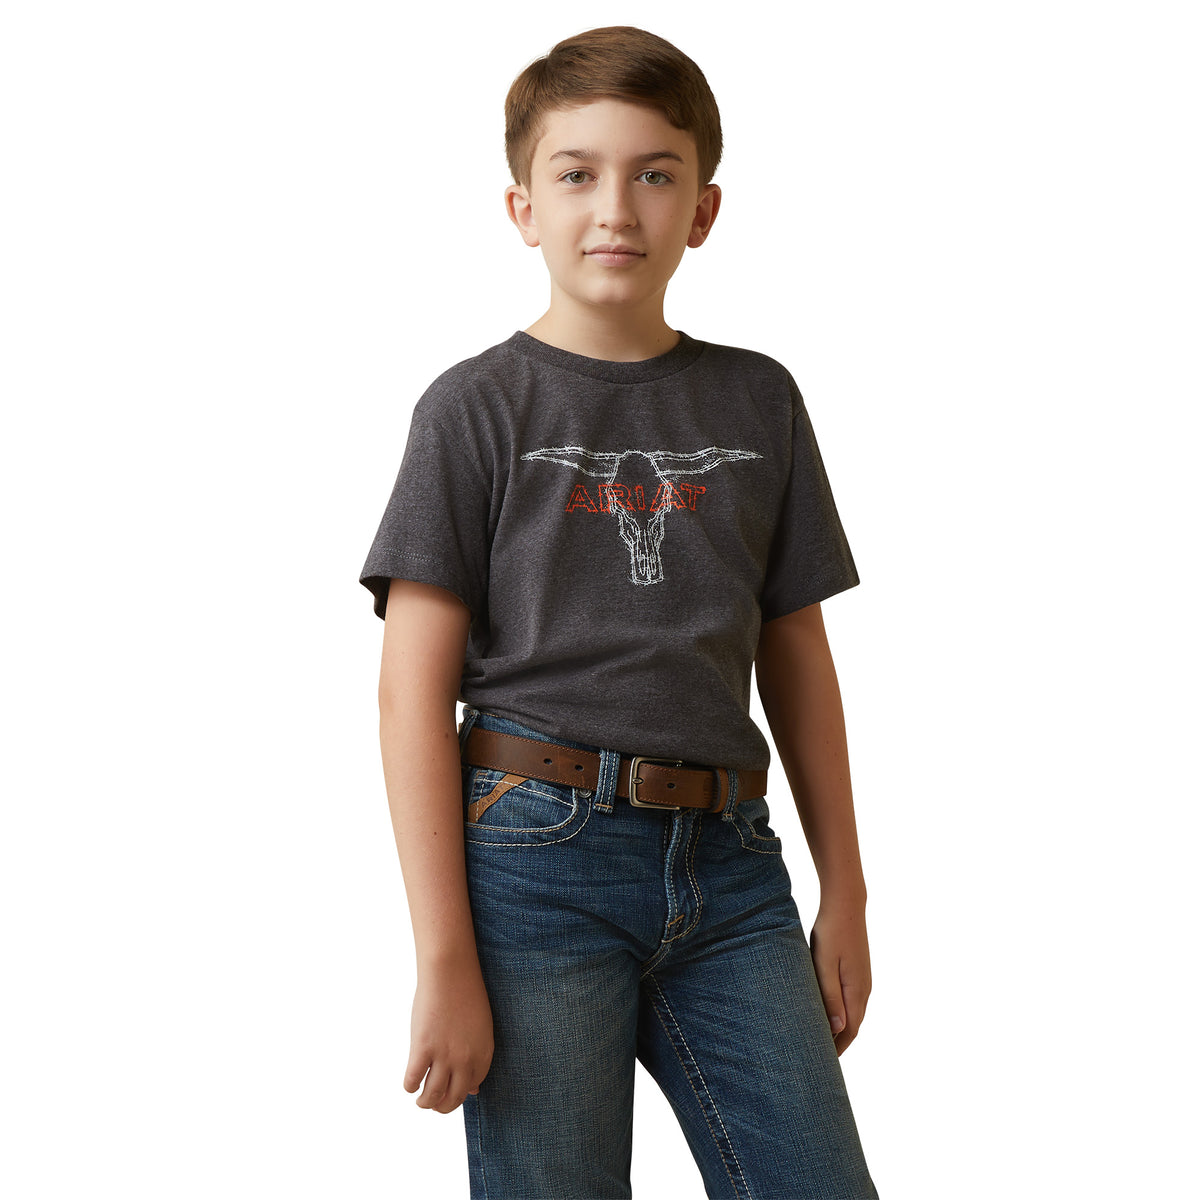 Ariat Boys Barbed Wire Steer T-Shirt - Charcoal